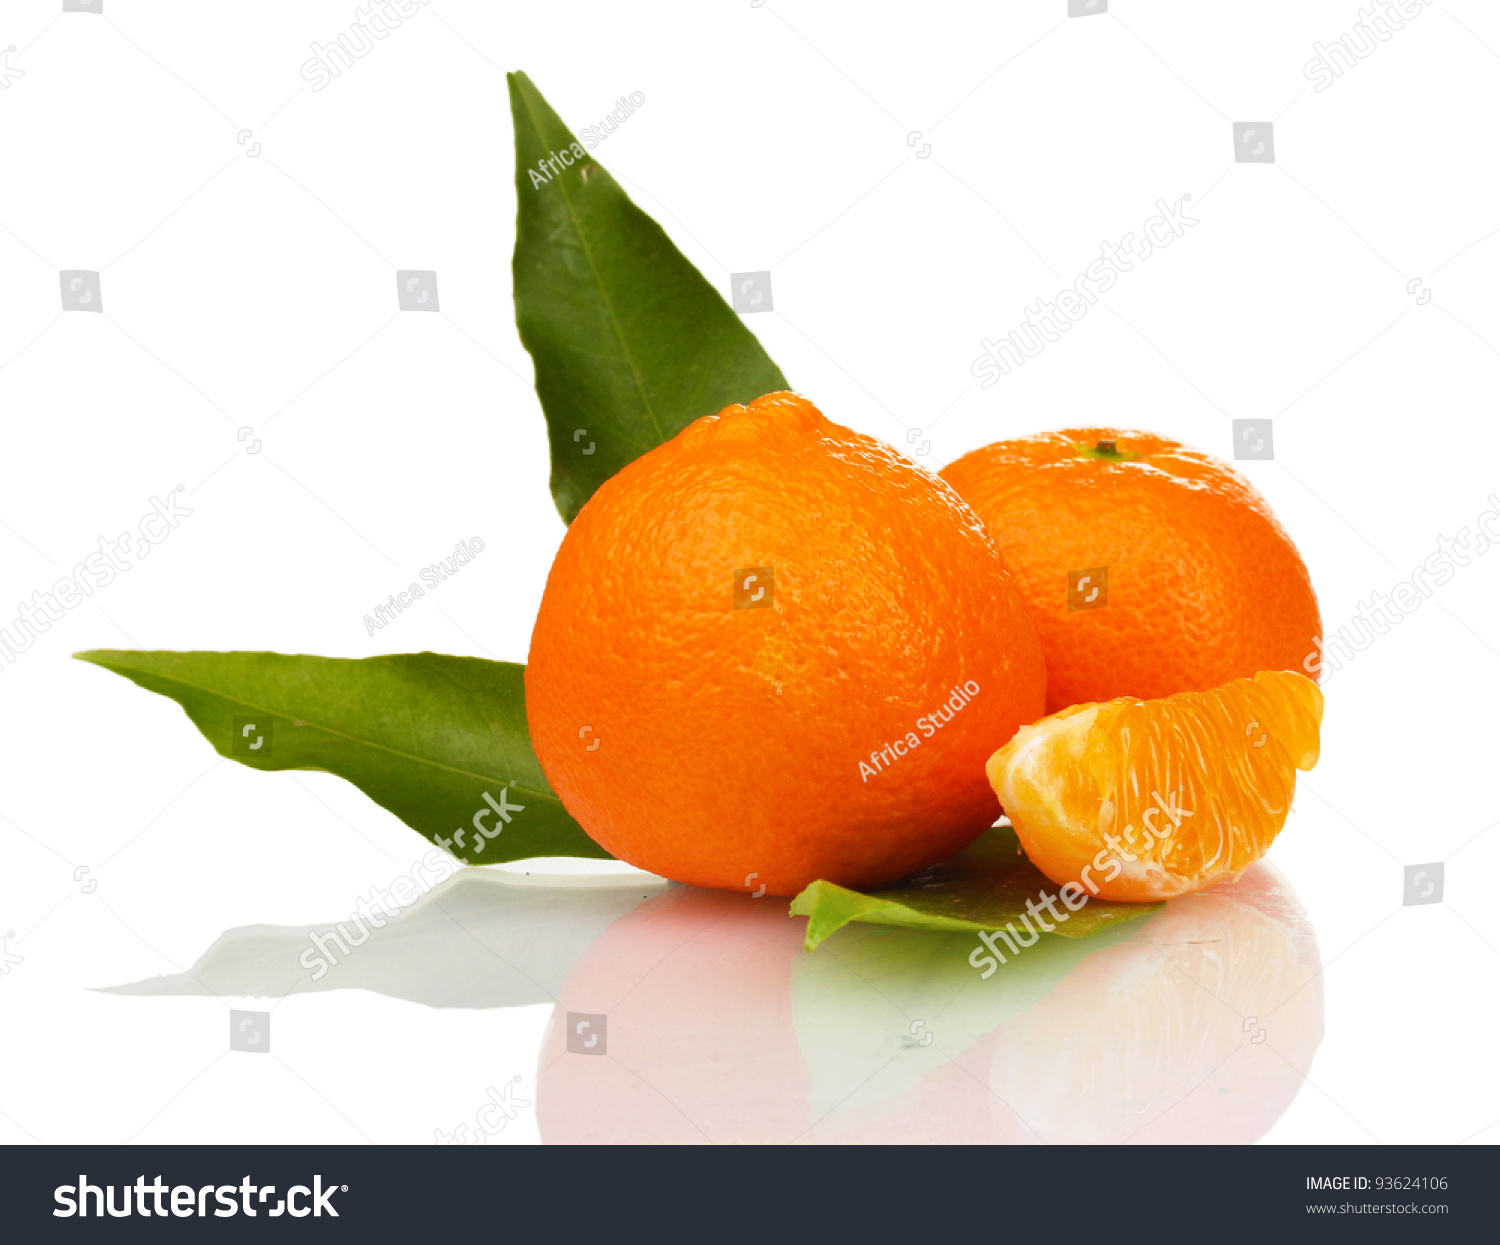 Ripe tasty tangerines with leaves and segments isolated on white #93624106